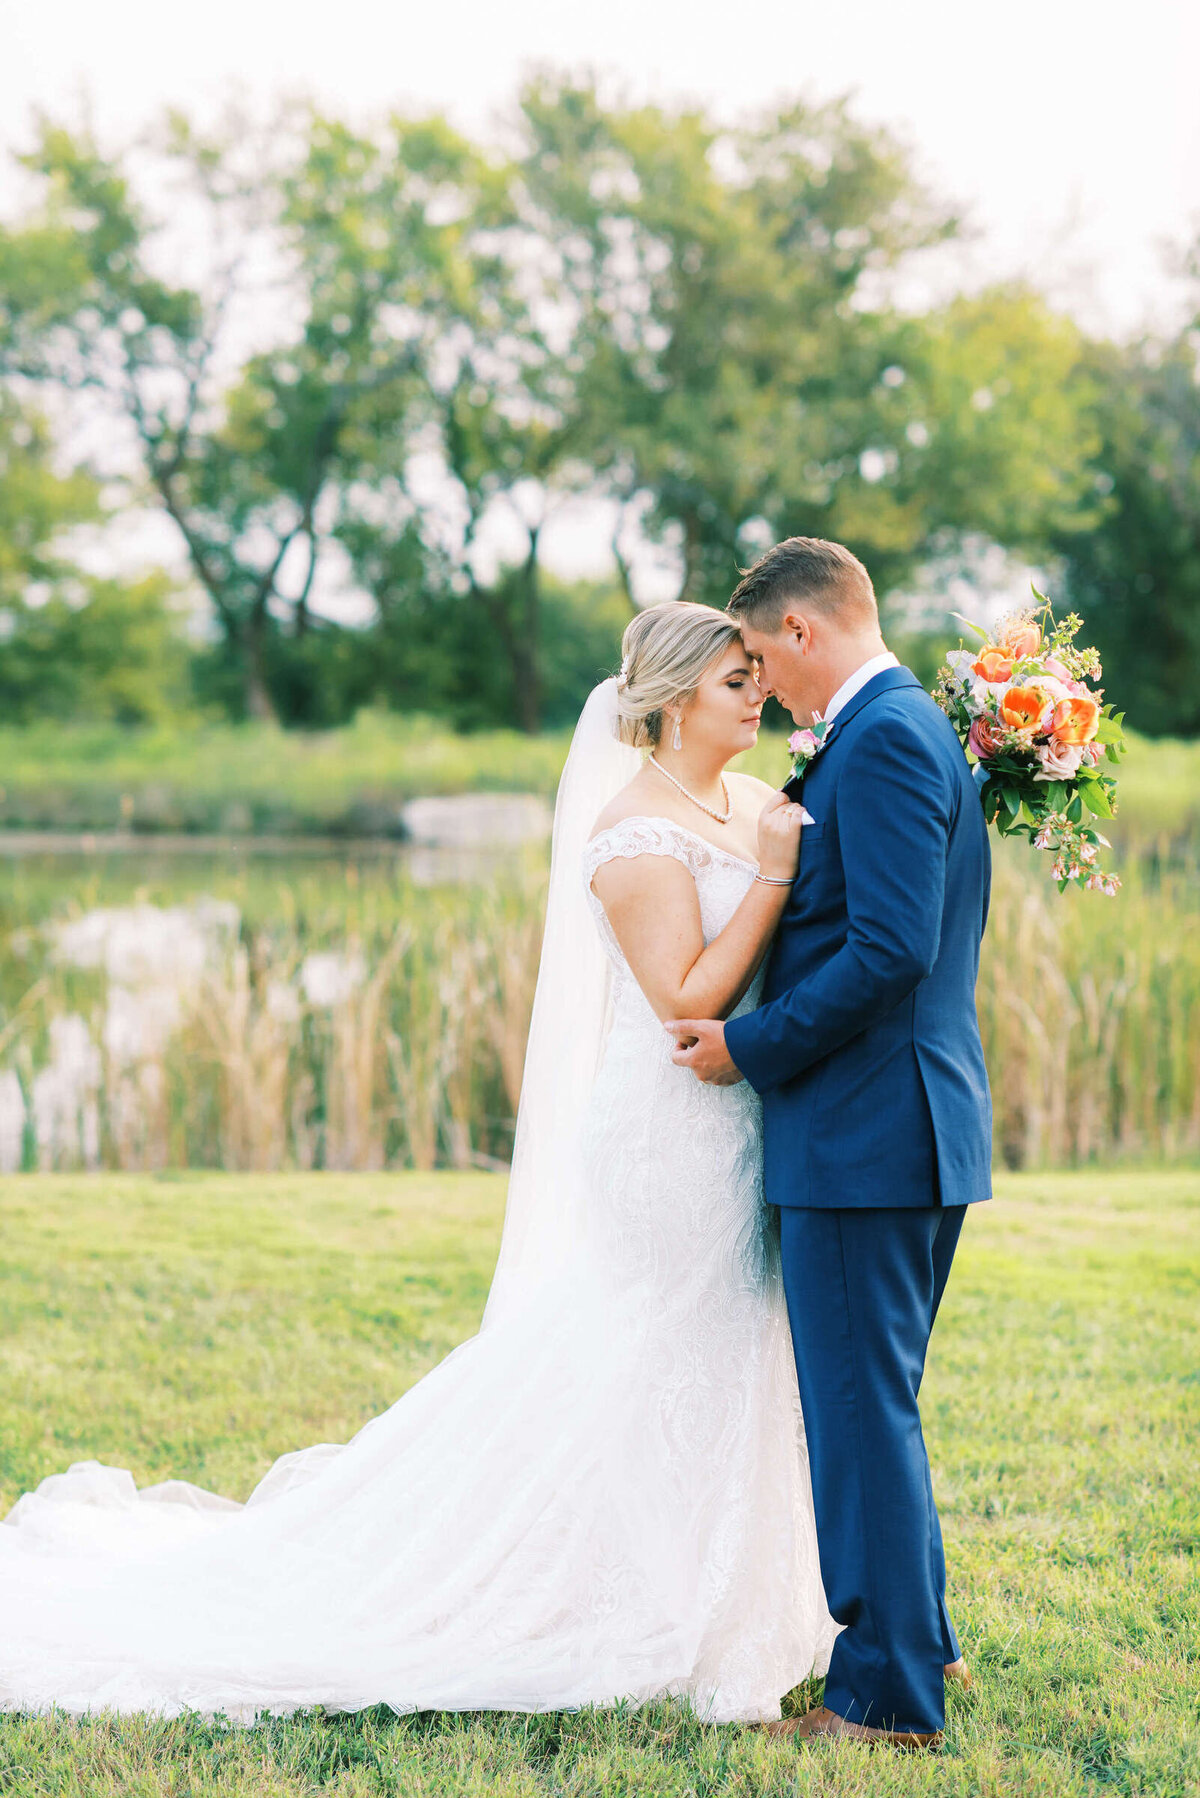 Newly married couple embraces at the Nest at Ruth Farms wedding venue